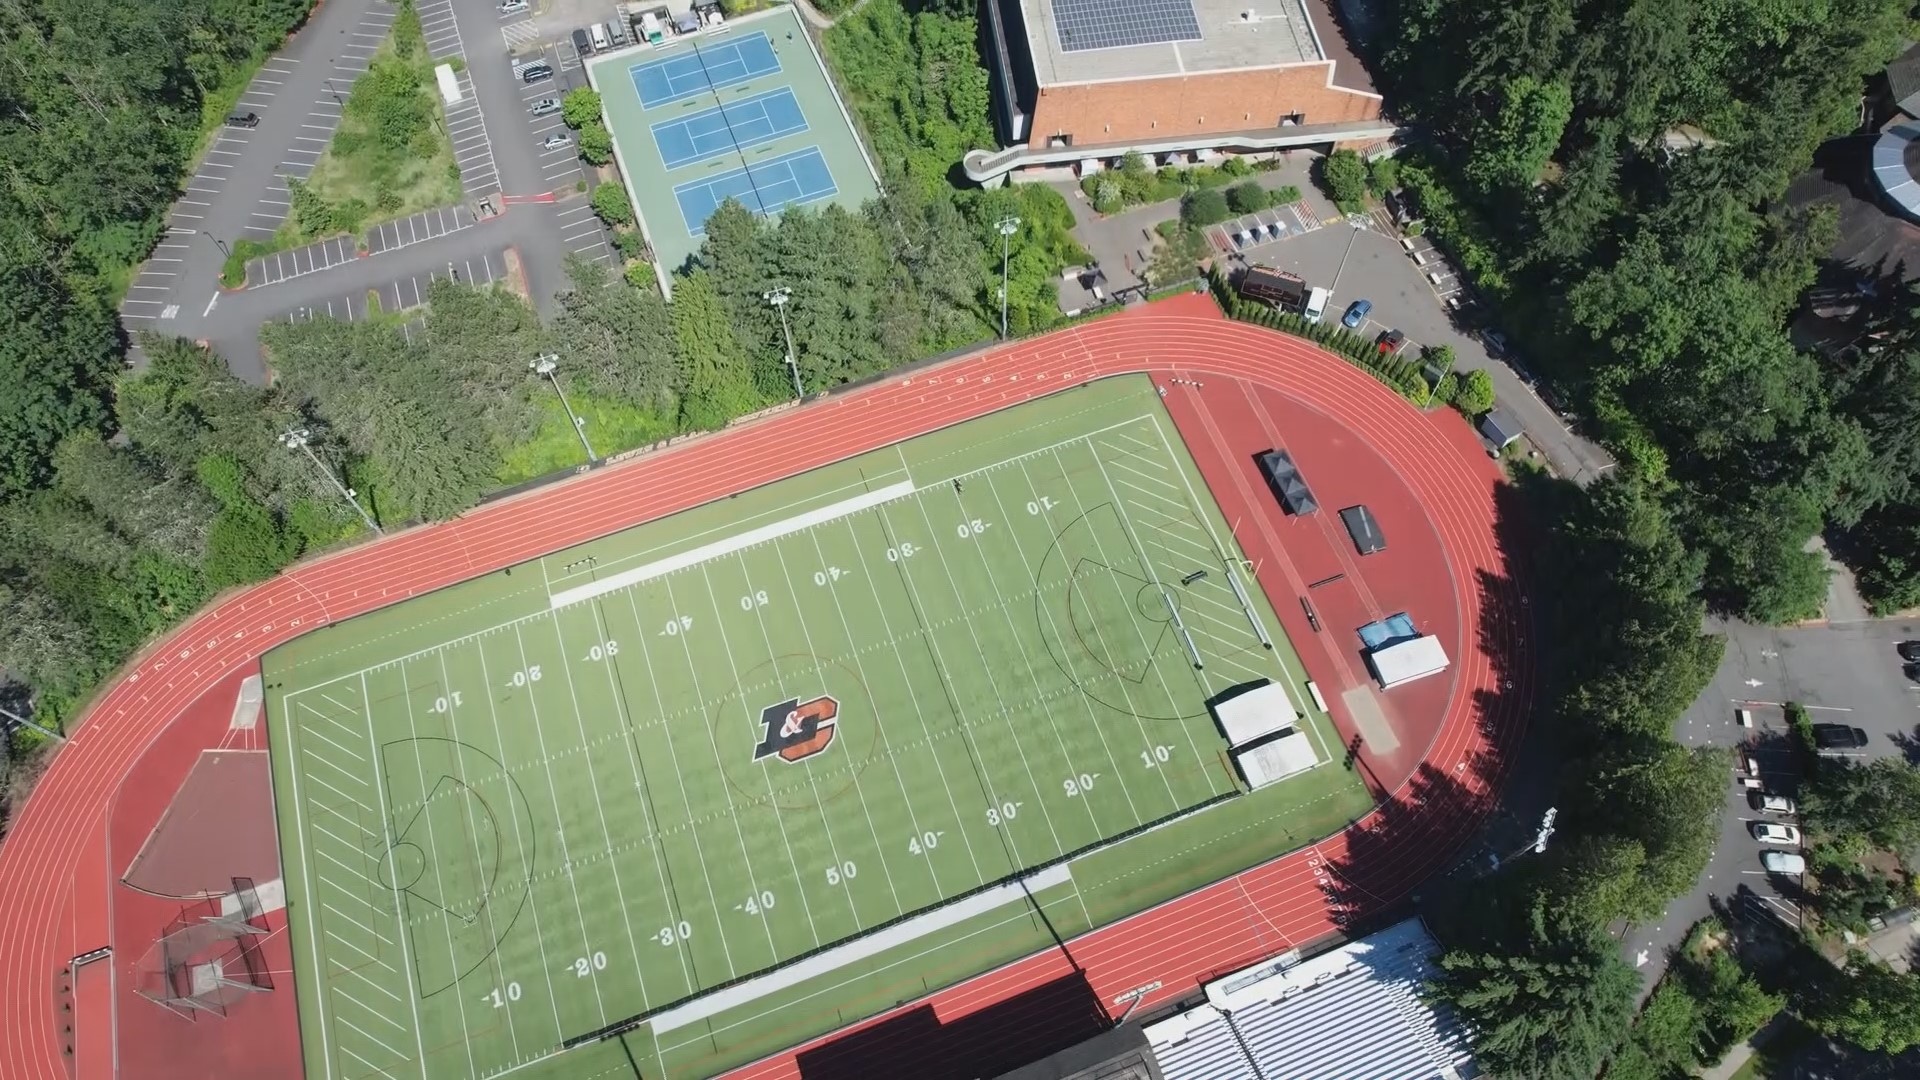 The fastest track and field athletes in the U.S. are competing at Lewis and Clark College June 10-11. Chris McGinness has details on the Portland Track Festival.